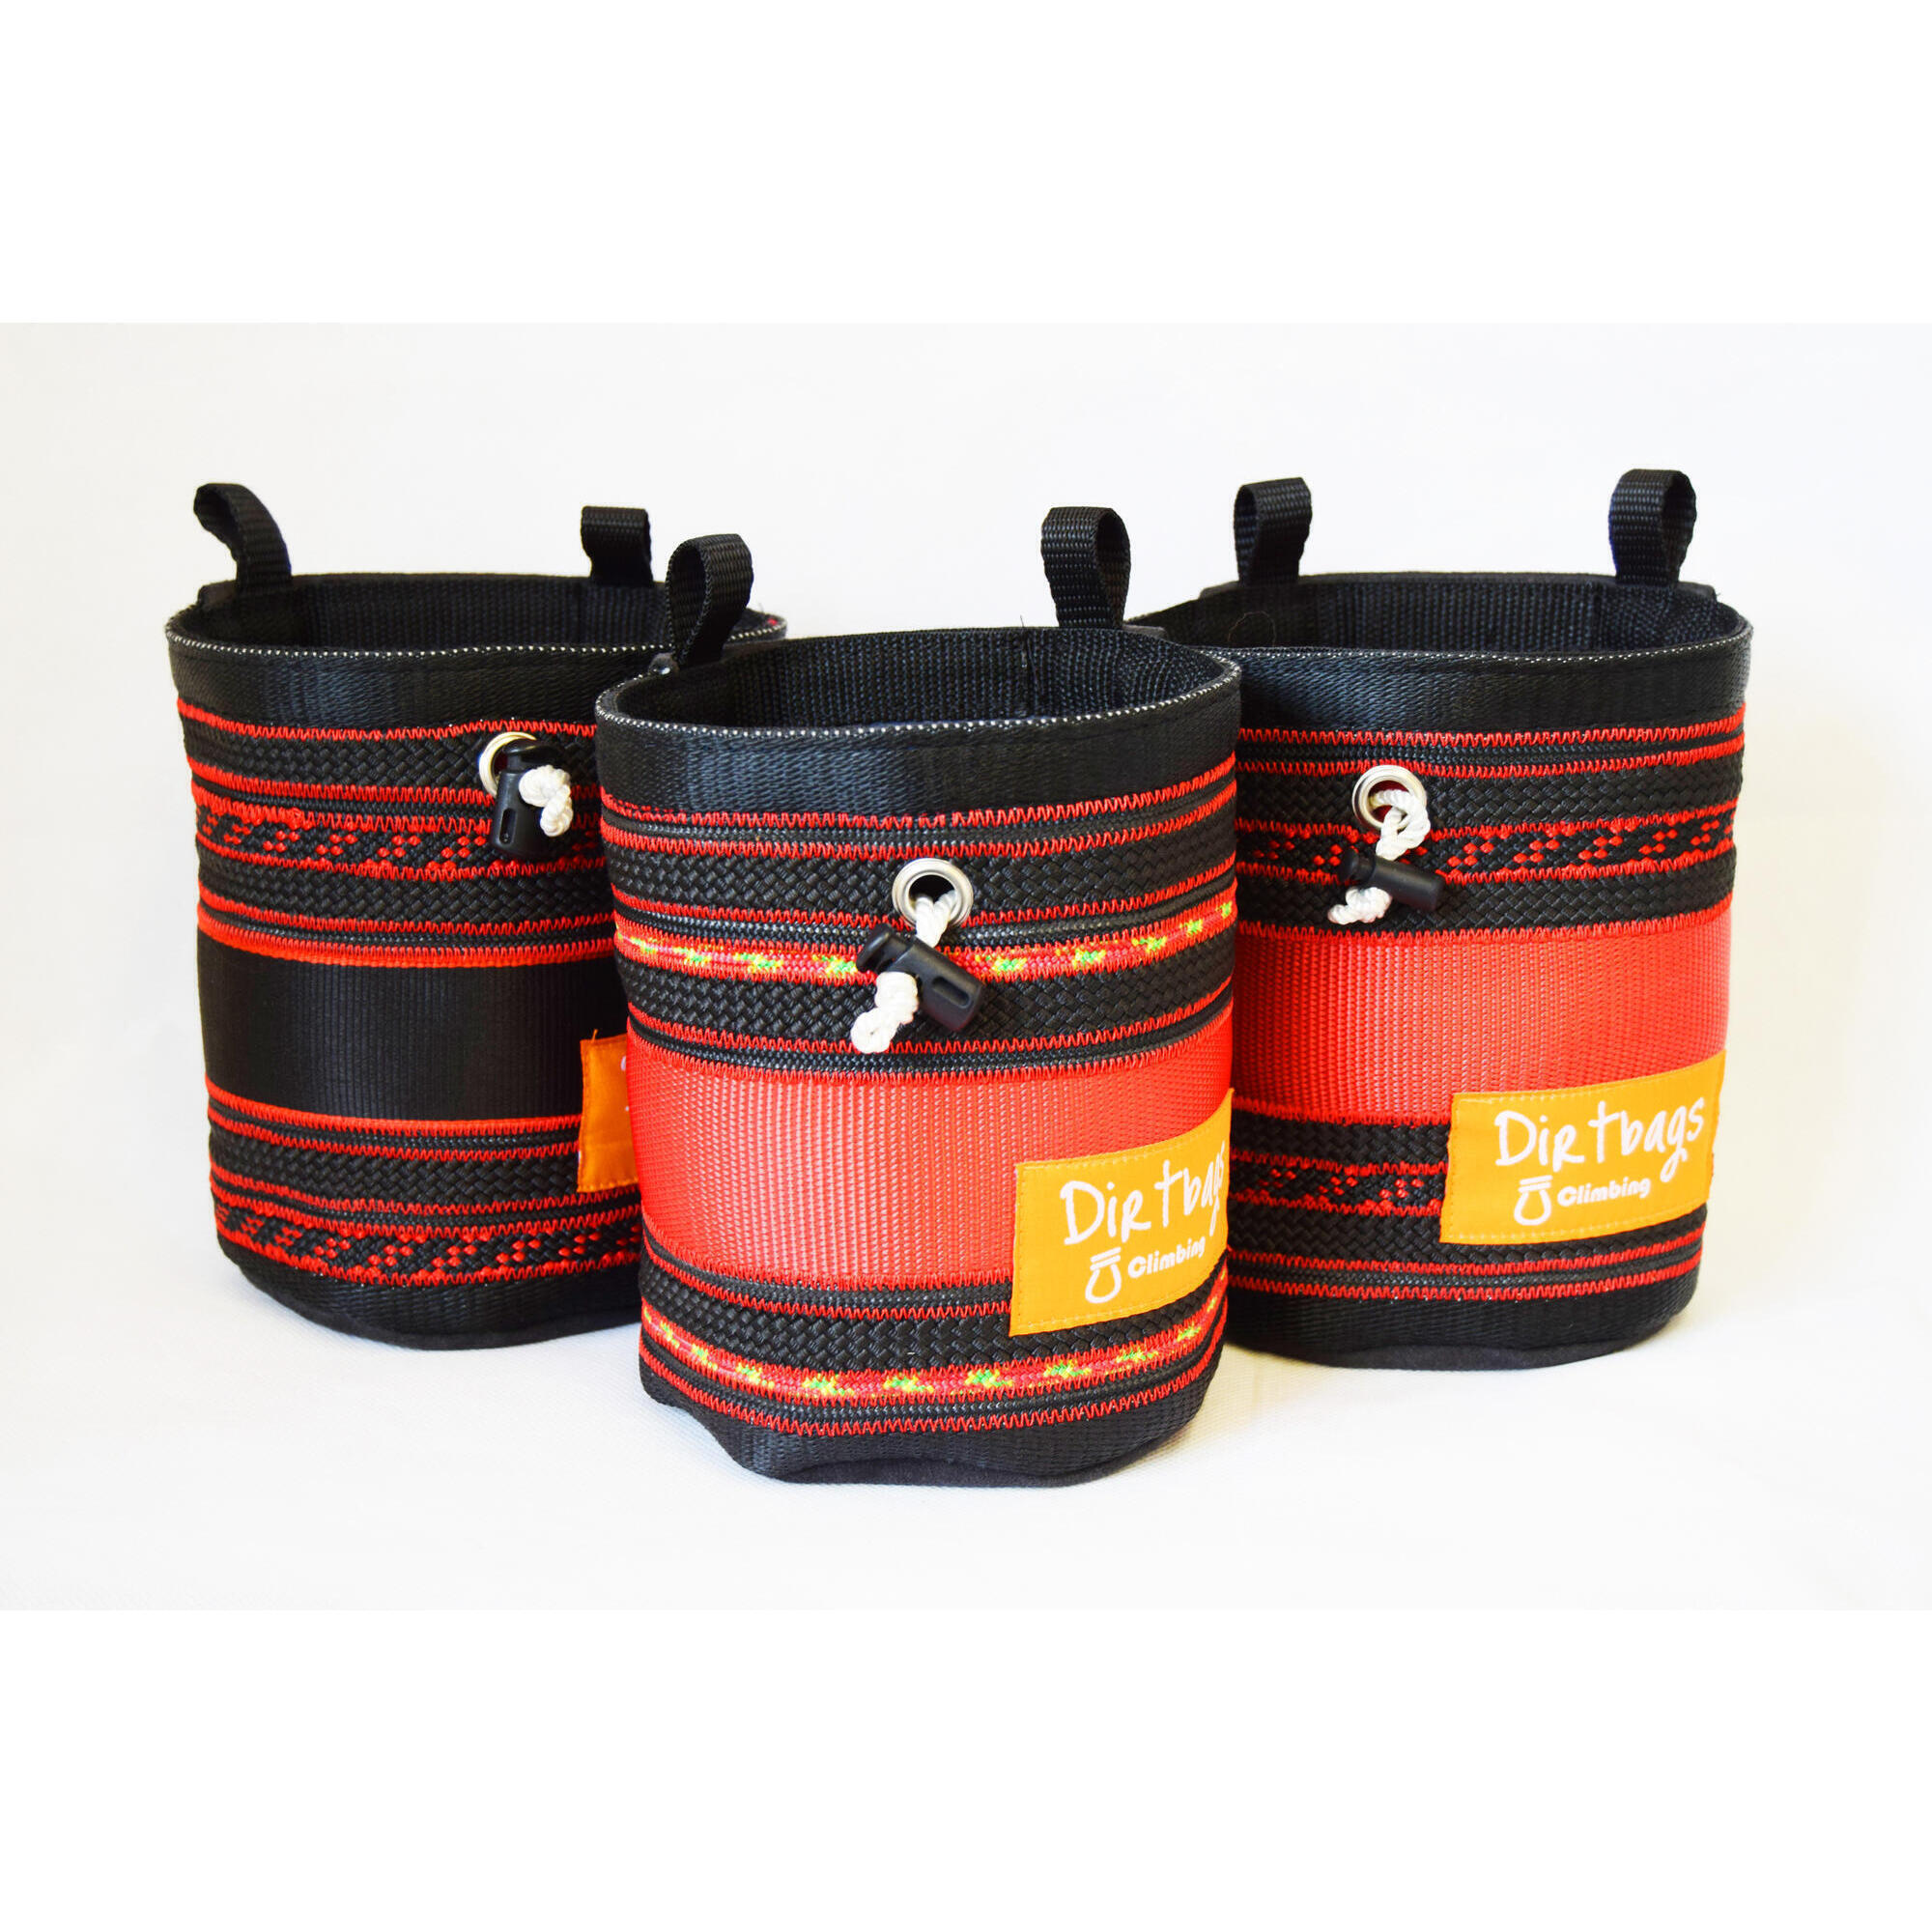 Recycled climbing rope chalk bag, made in the UK / Red 1/4